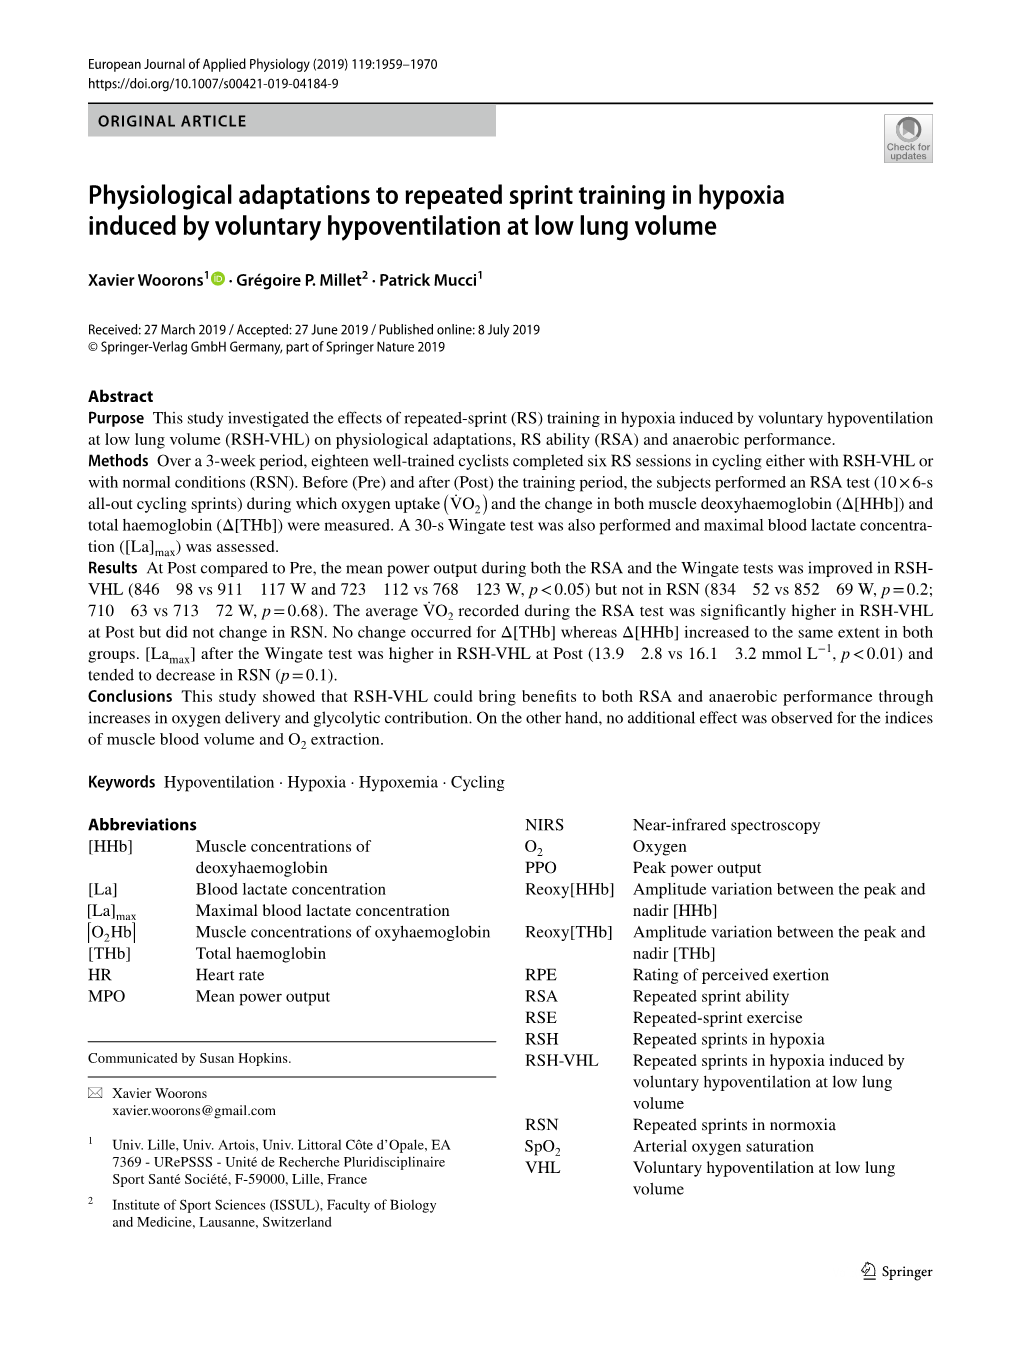 Physiological Adaptations to Repeated Sprint Training in Hypoxia Induced by Voluntary Hypoventilation at Low Lung Volume